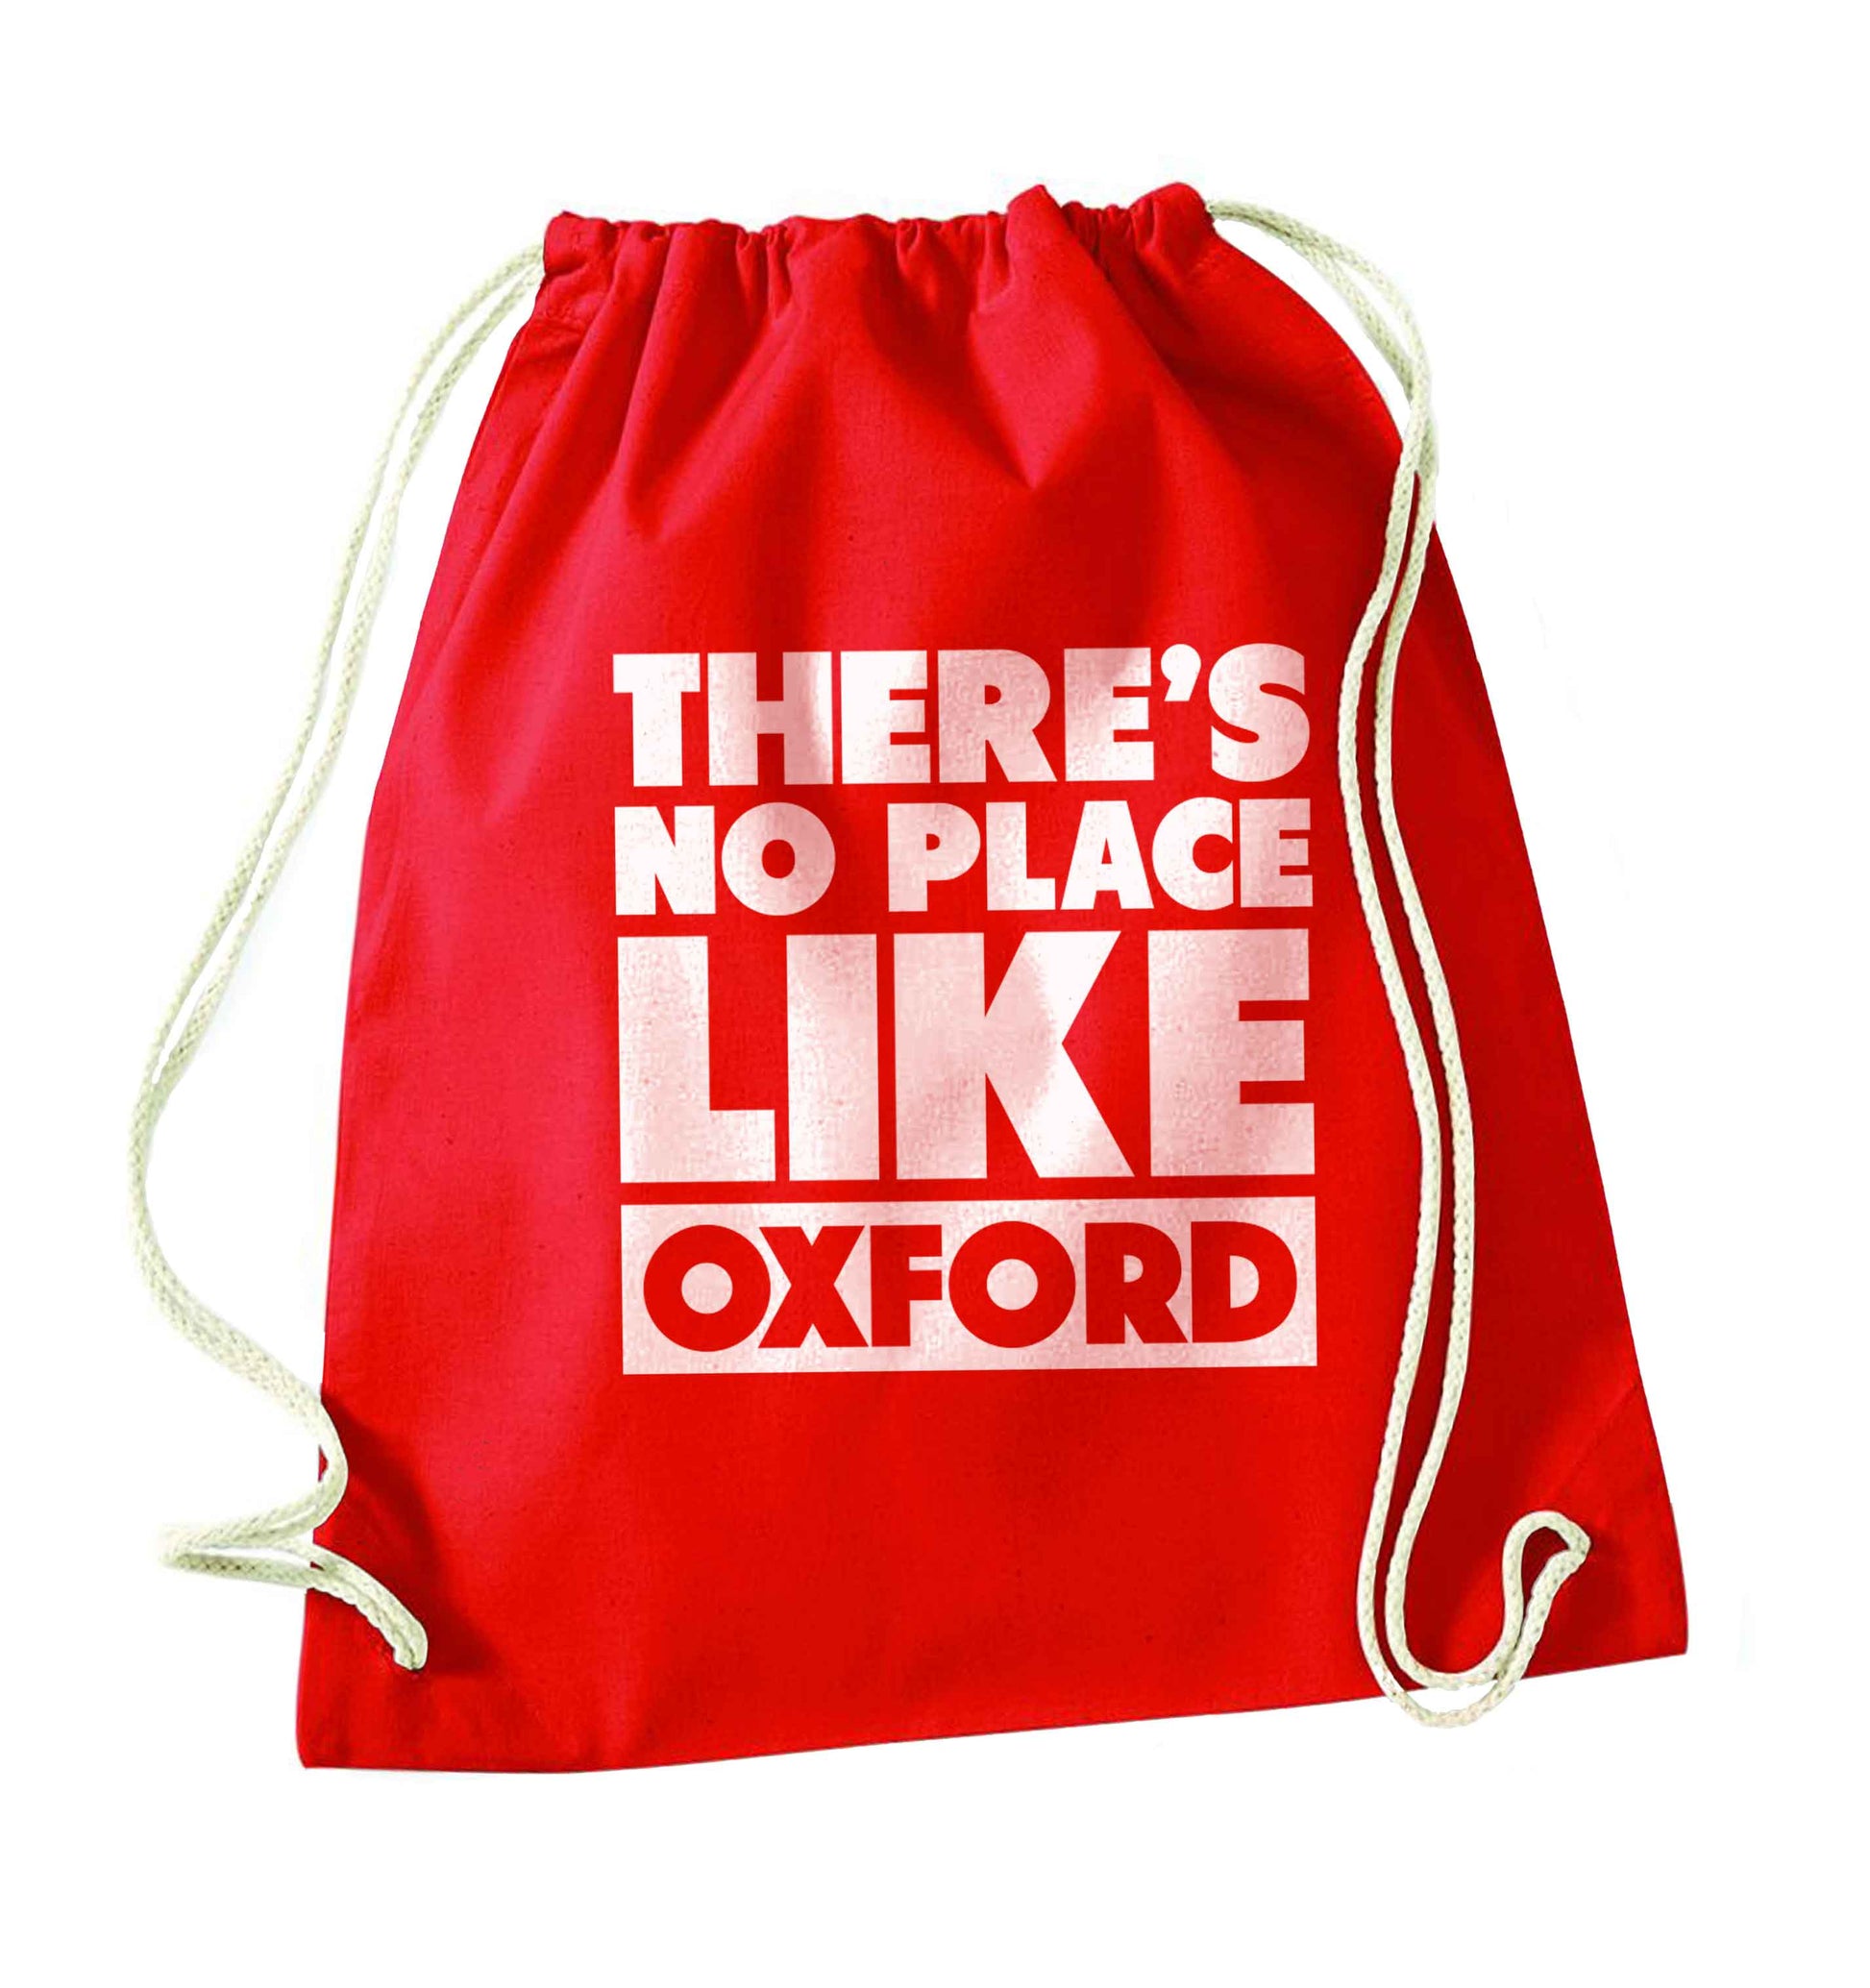 There's no place like Oxford red drawstring bag 